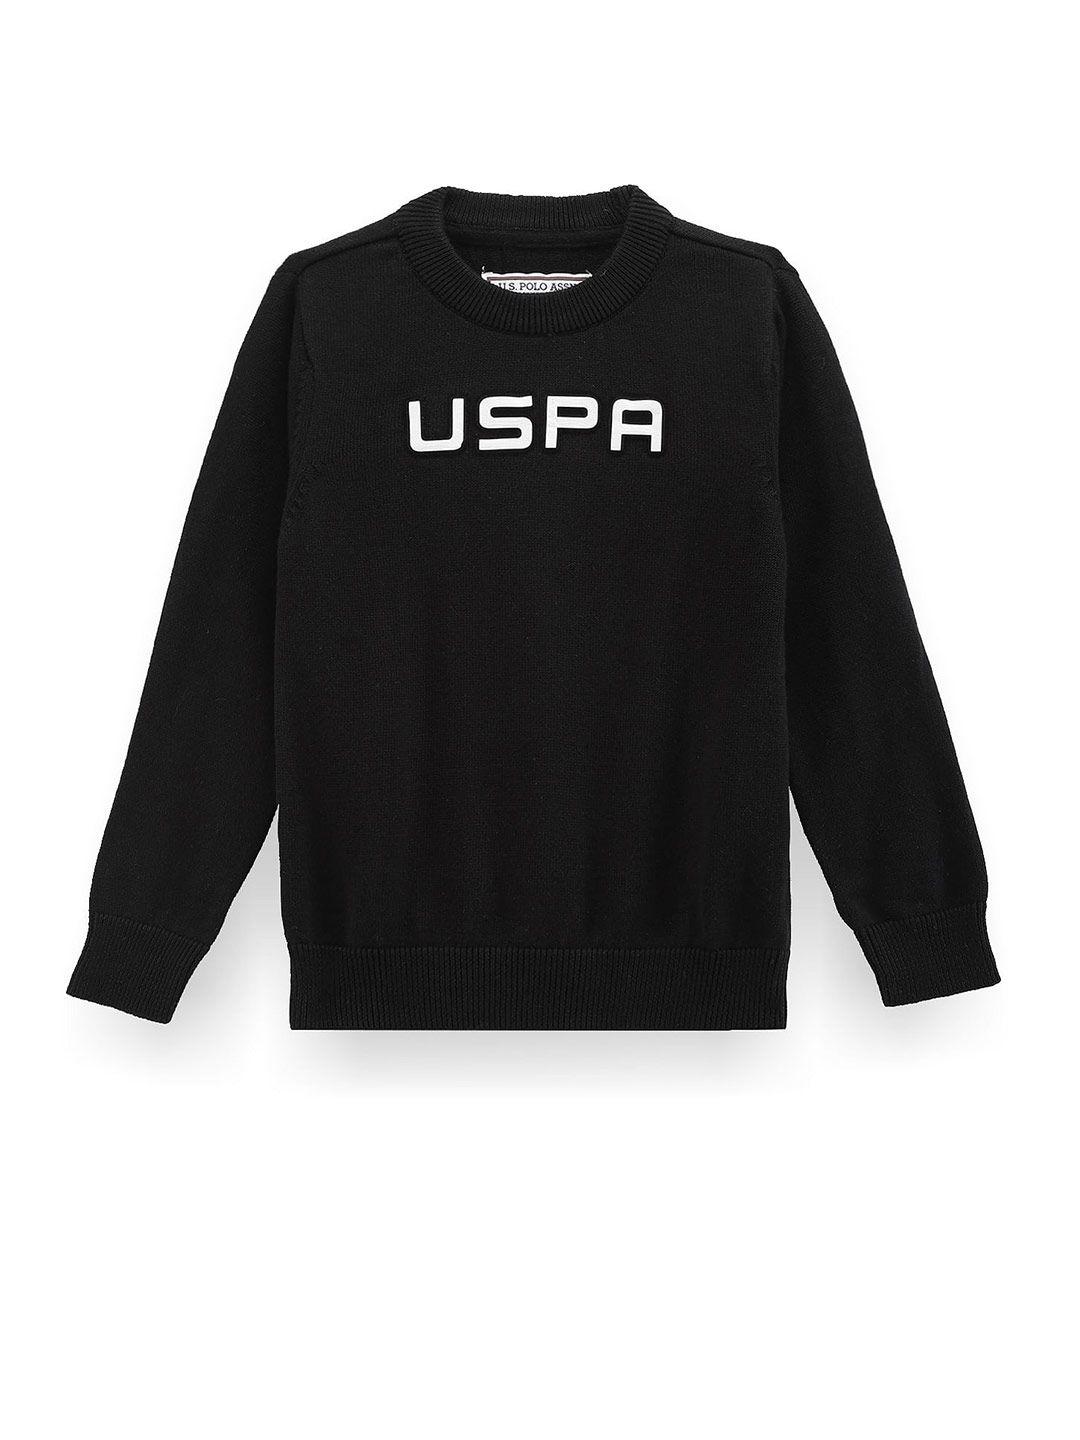 u.s. polo assn. kids boys typography printed pullover